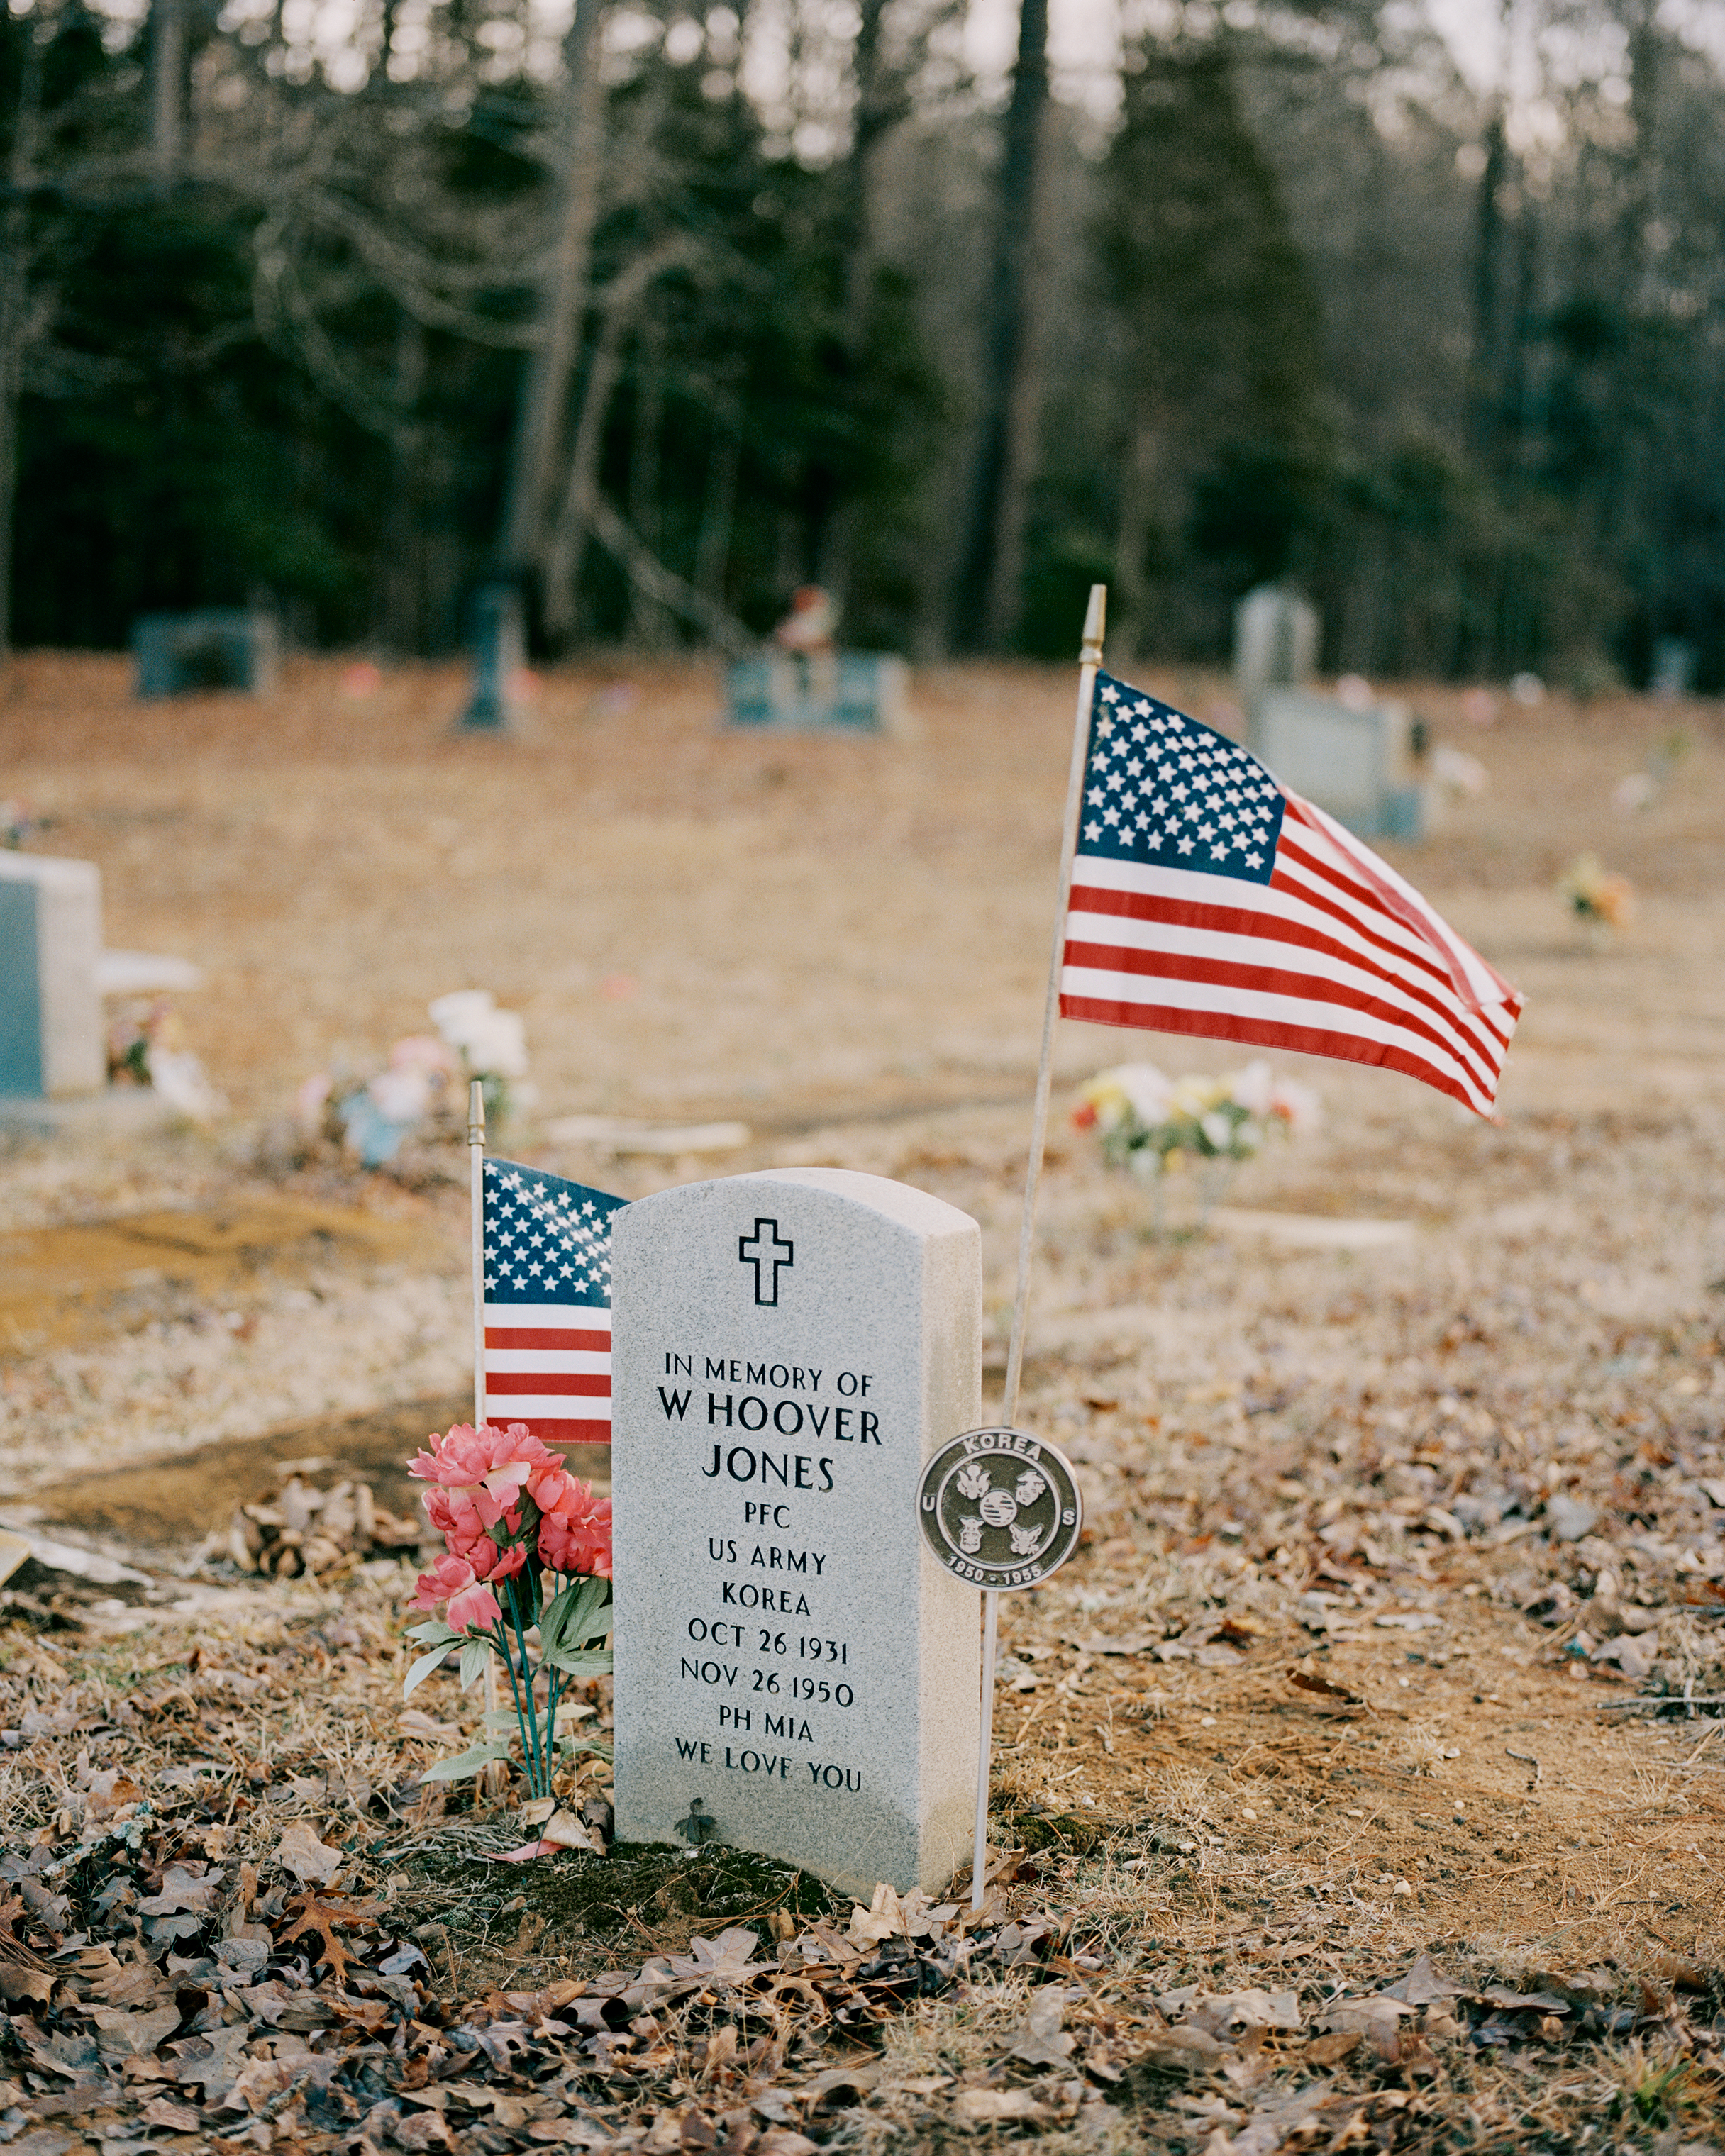 Hoover’s head stone in North Carolina, photographed in February; the grave below remains empty. (Benjamin Rasmussen for TIME)